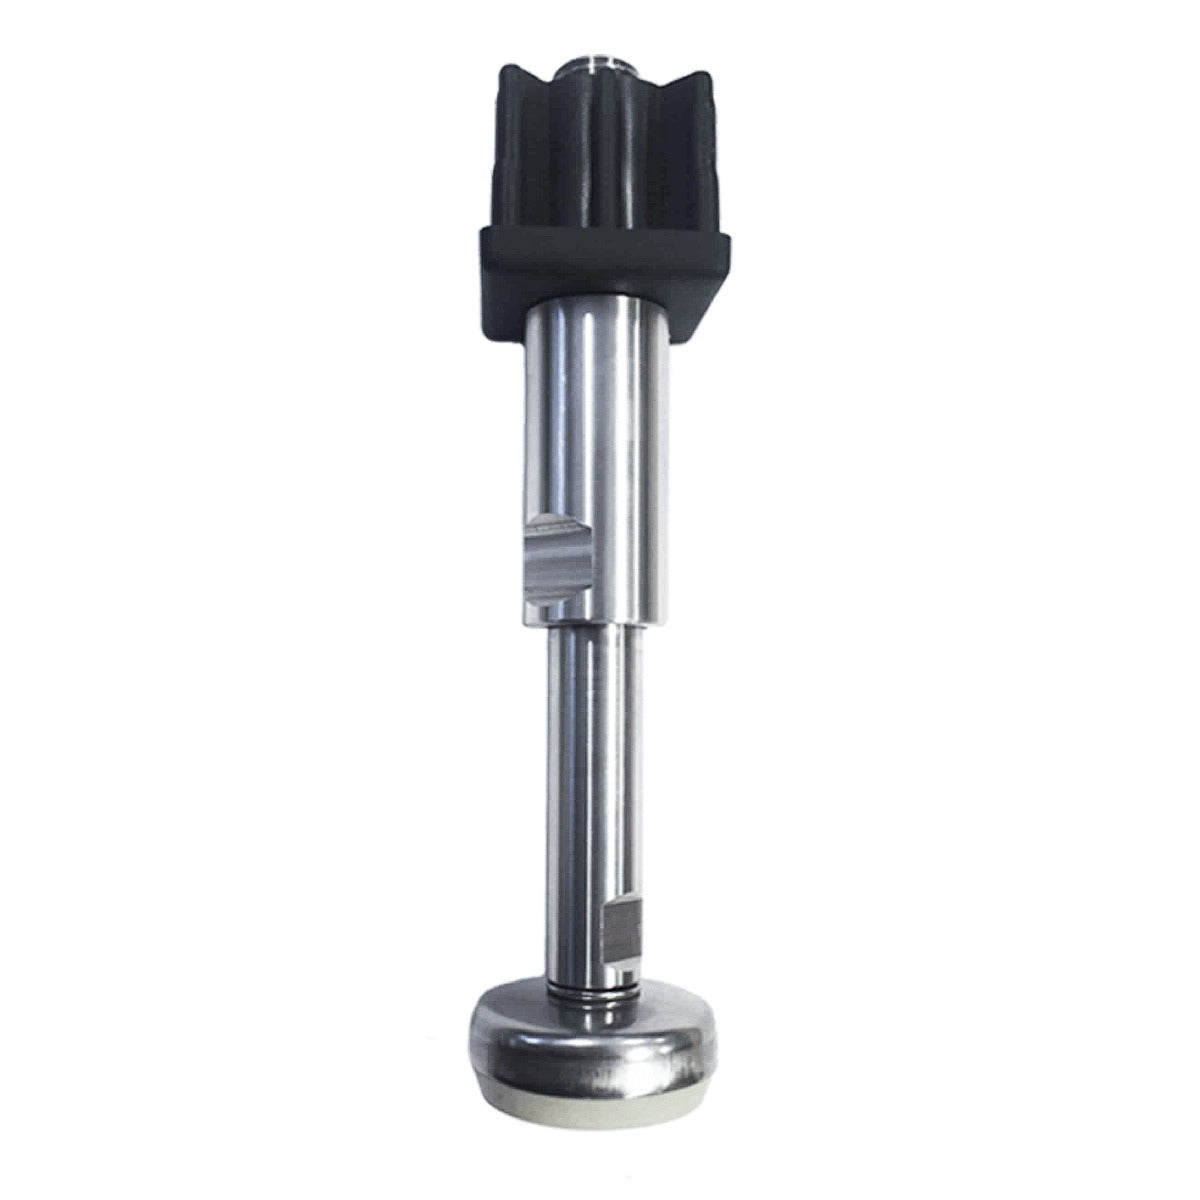 Stainless steel hygienic tall foot for standard tables